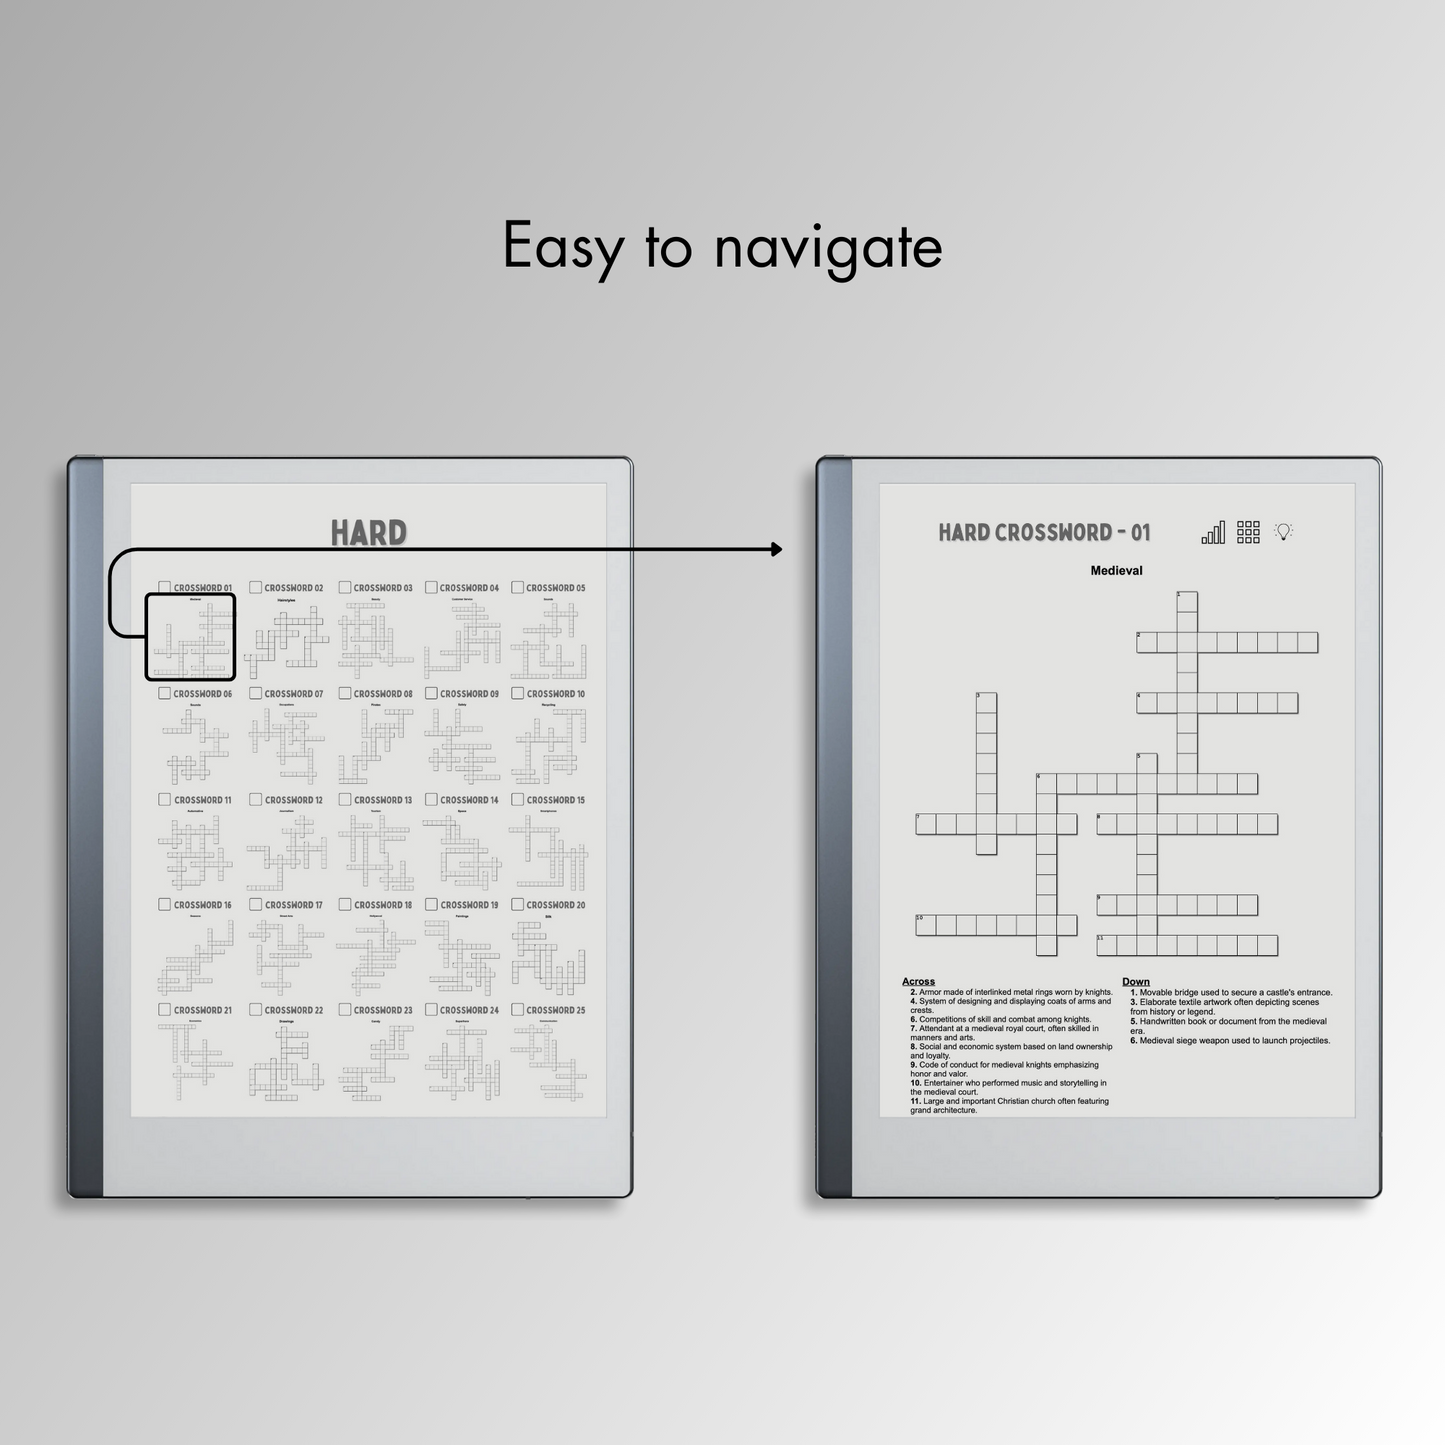 Remarkable 2 Crossword Puzzles with easy navigations.